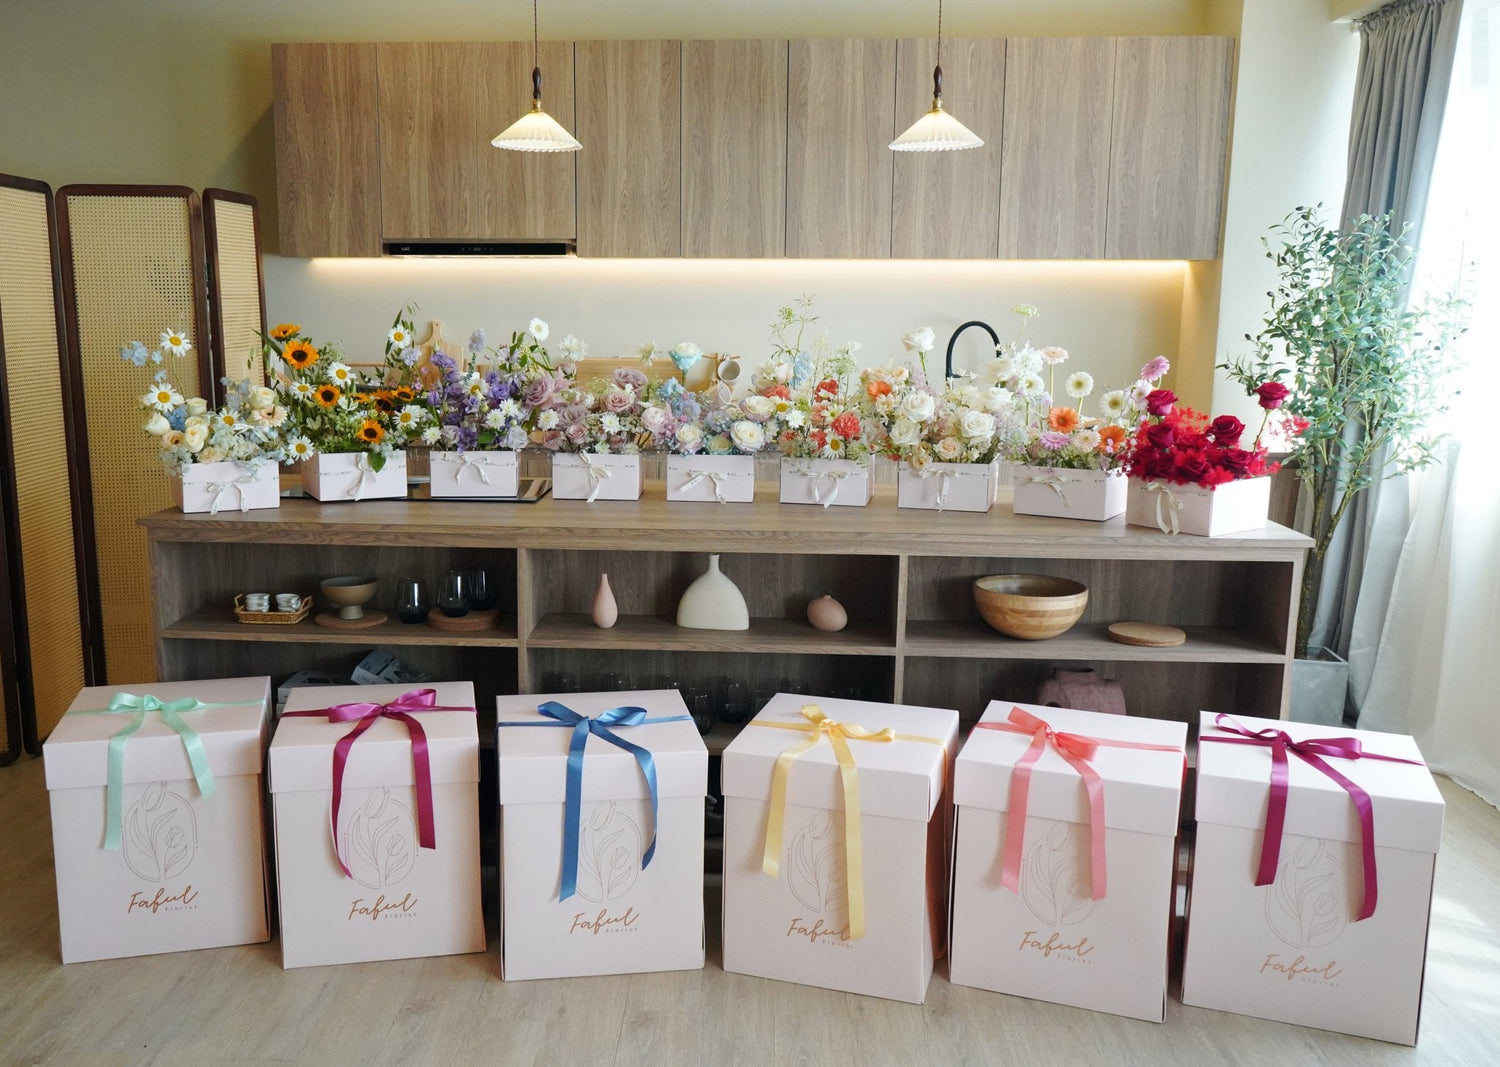 A flower arrangement creatively concealed within a surprise box, waiting to be unveiled and bring joy to its recipient.